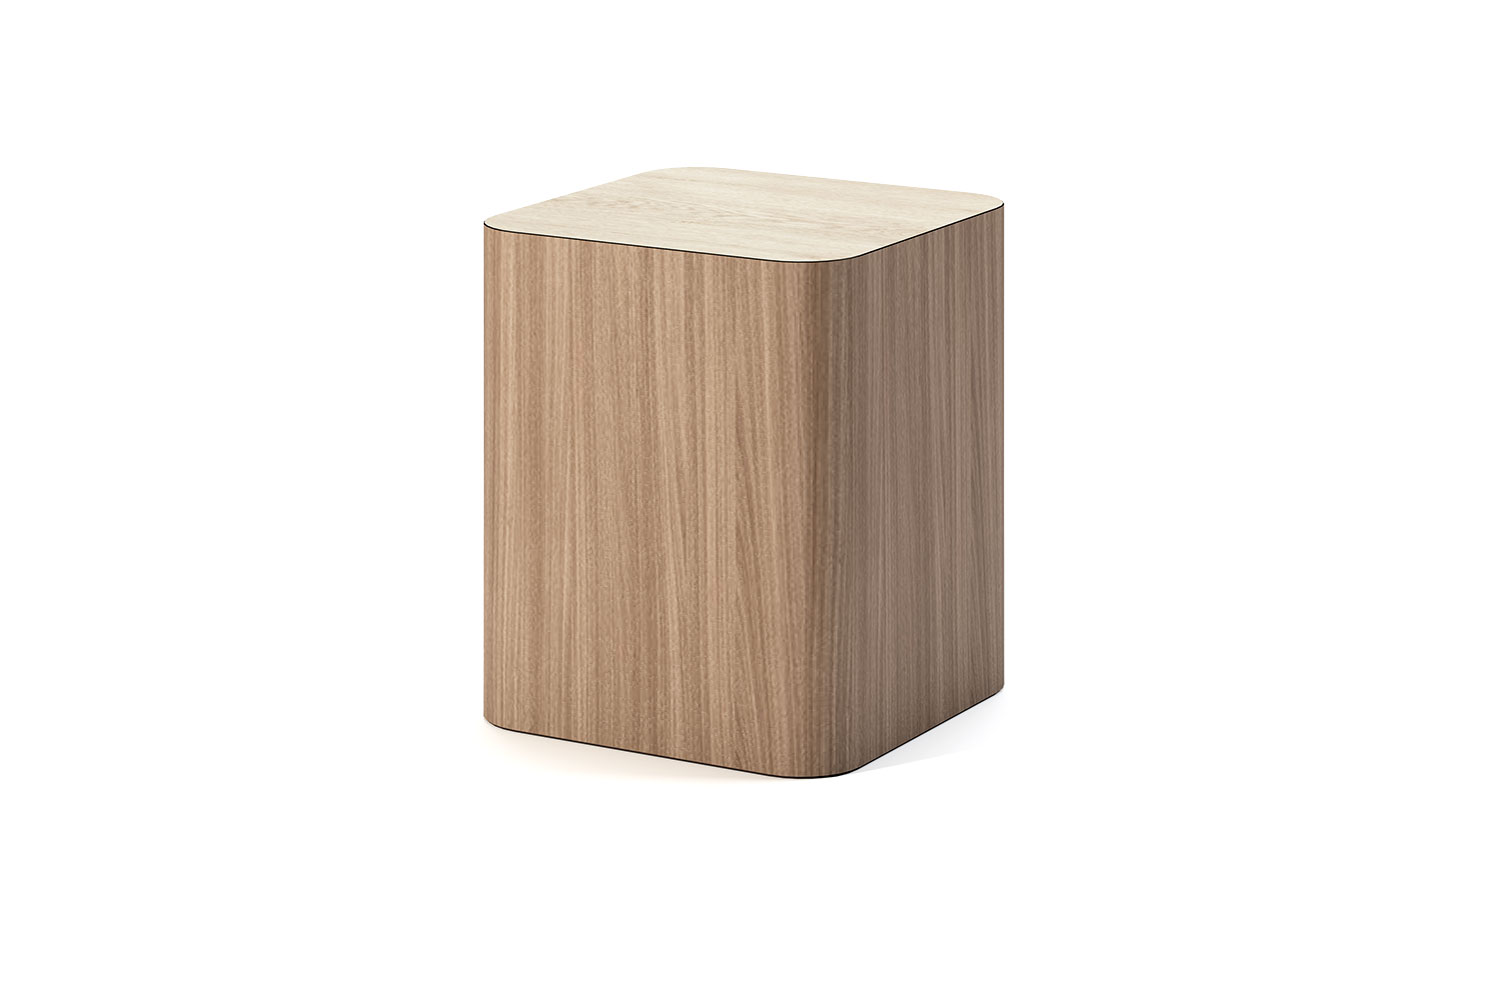 Cube Plus 18 Square Occasional Table with 2-tone Laminate